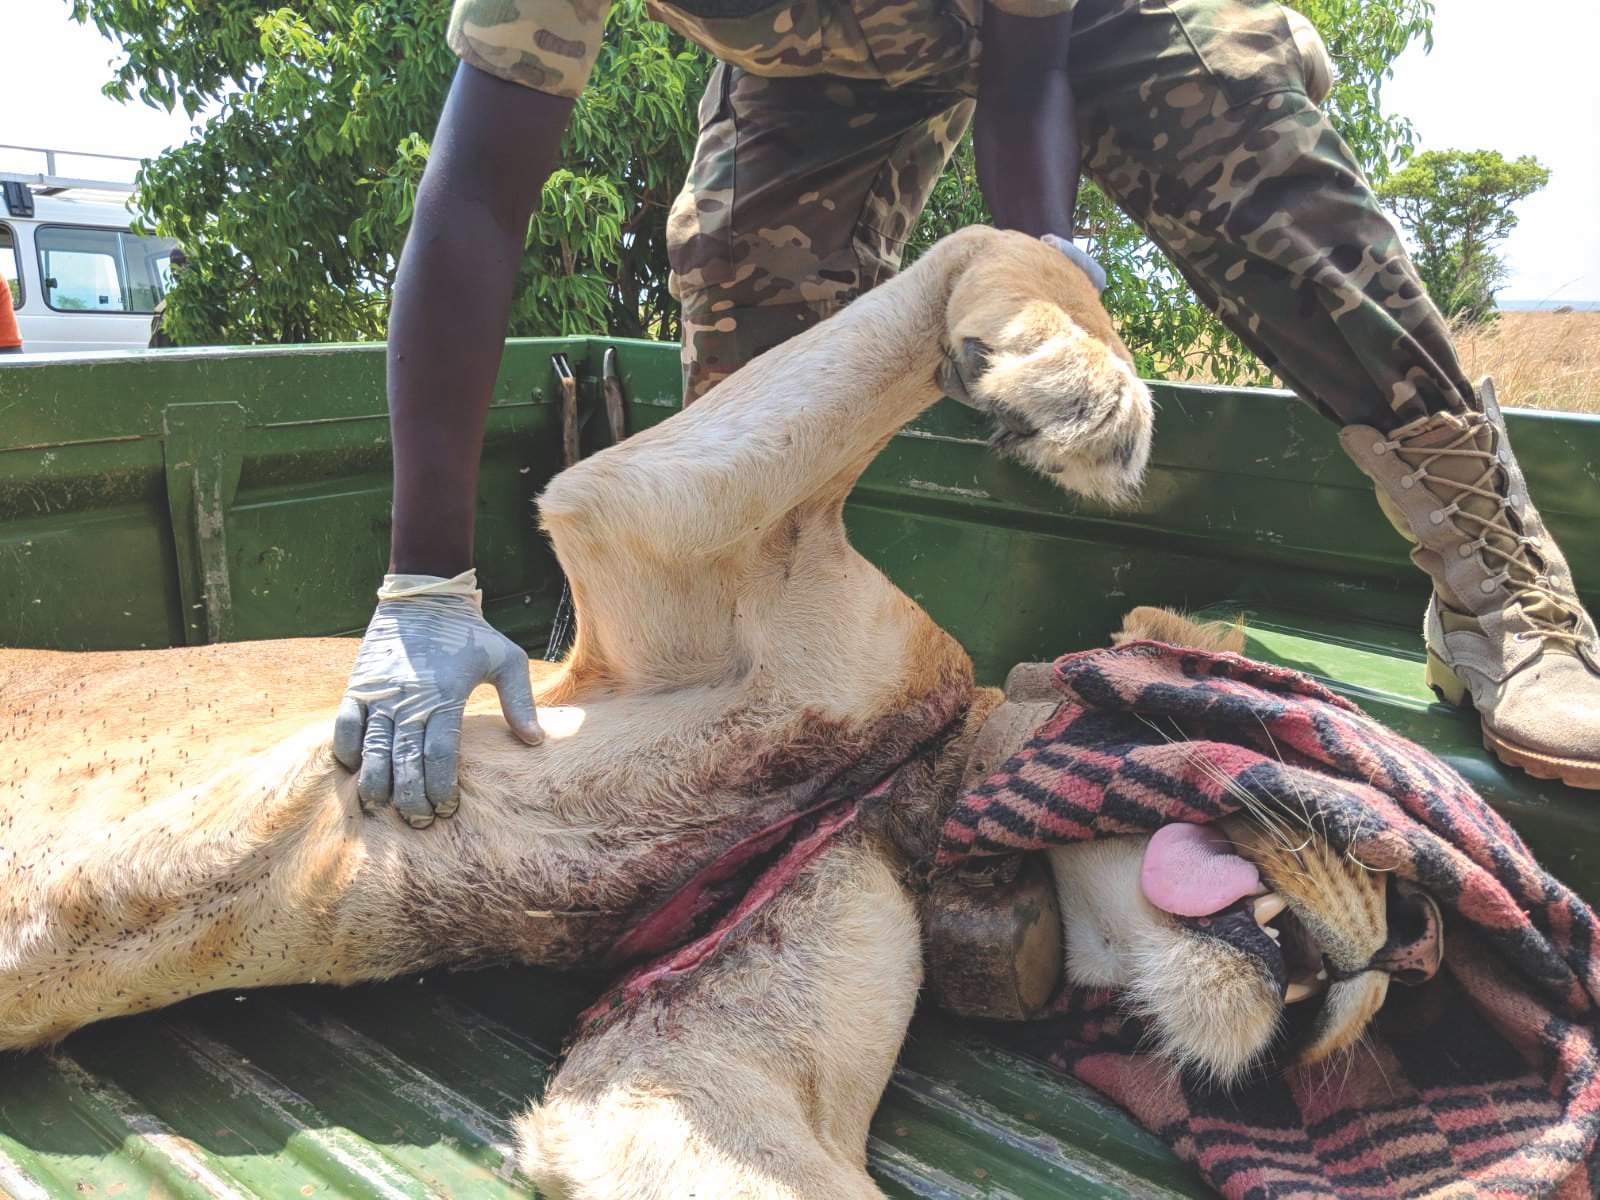 Rangers treat a sedated lion with a severe snare wound across its chest.